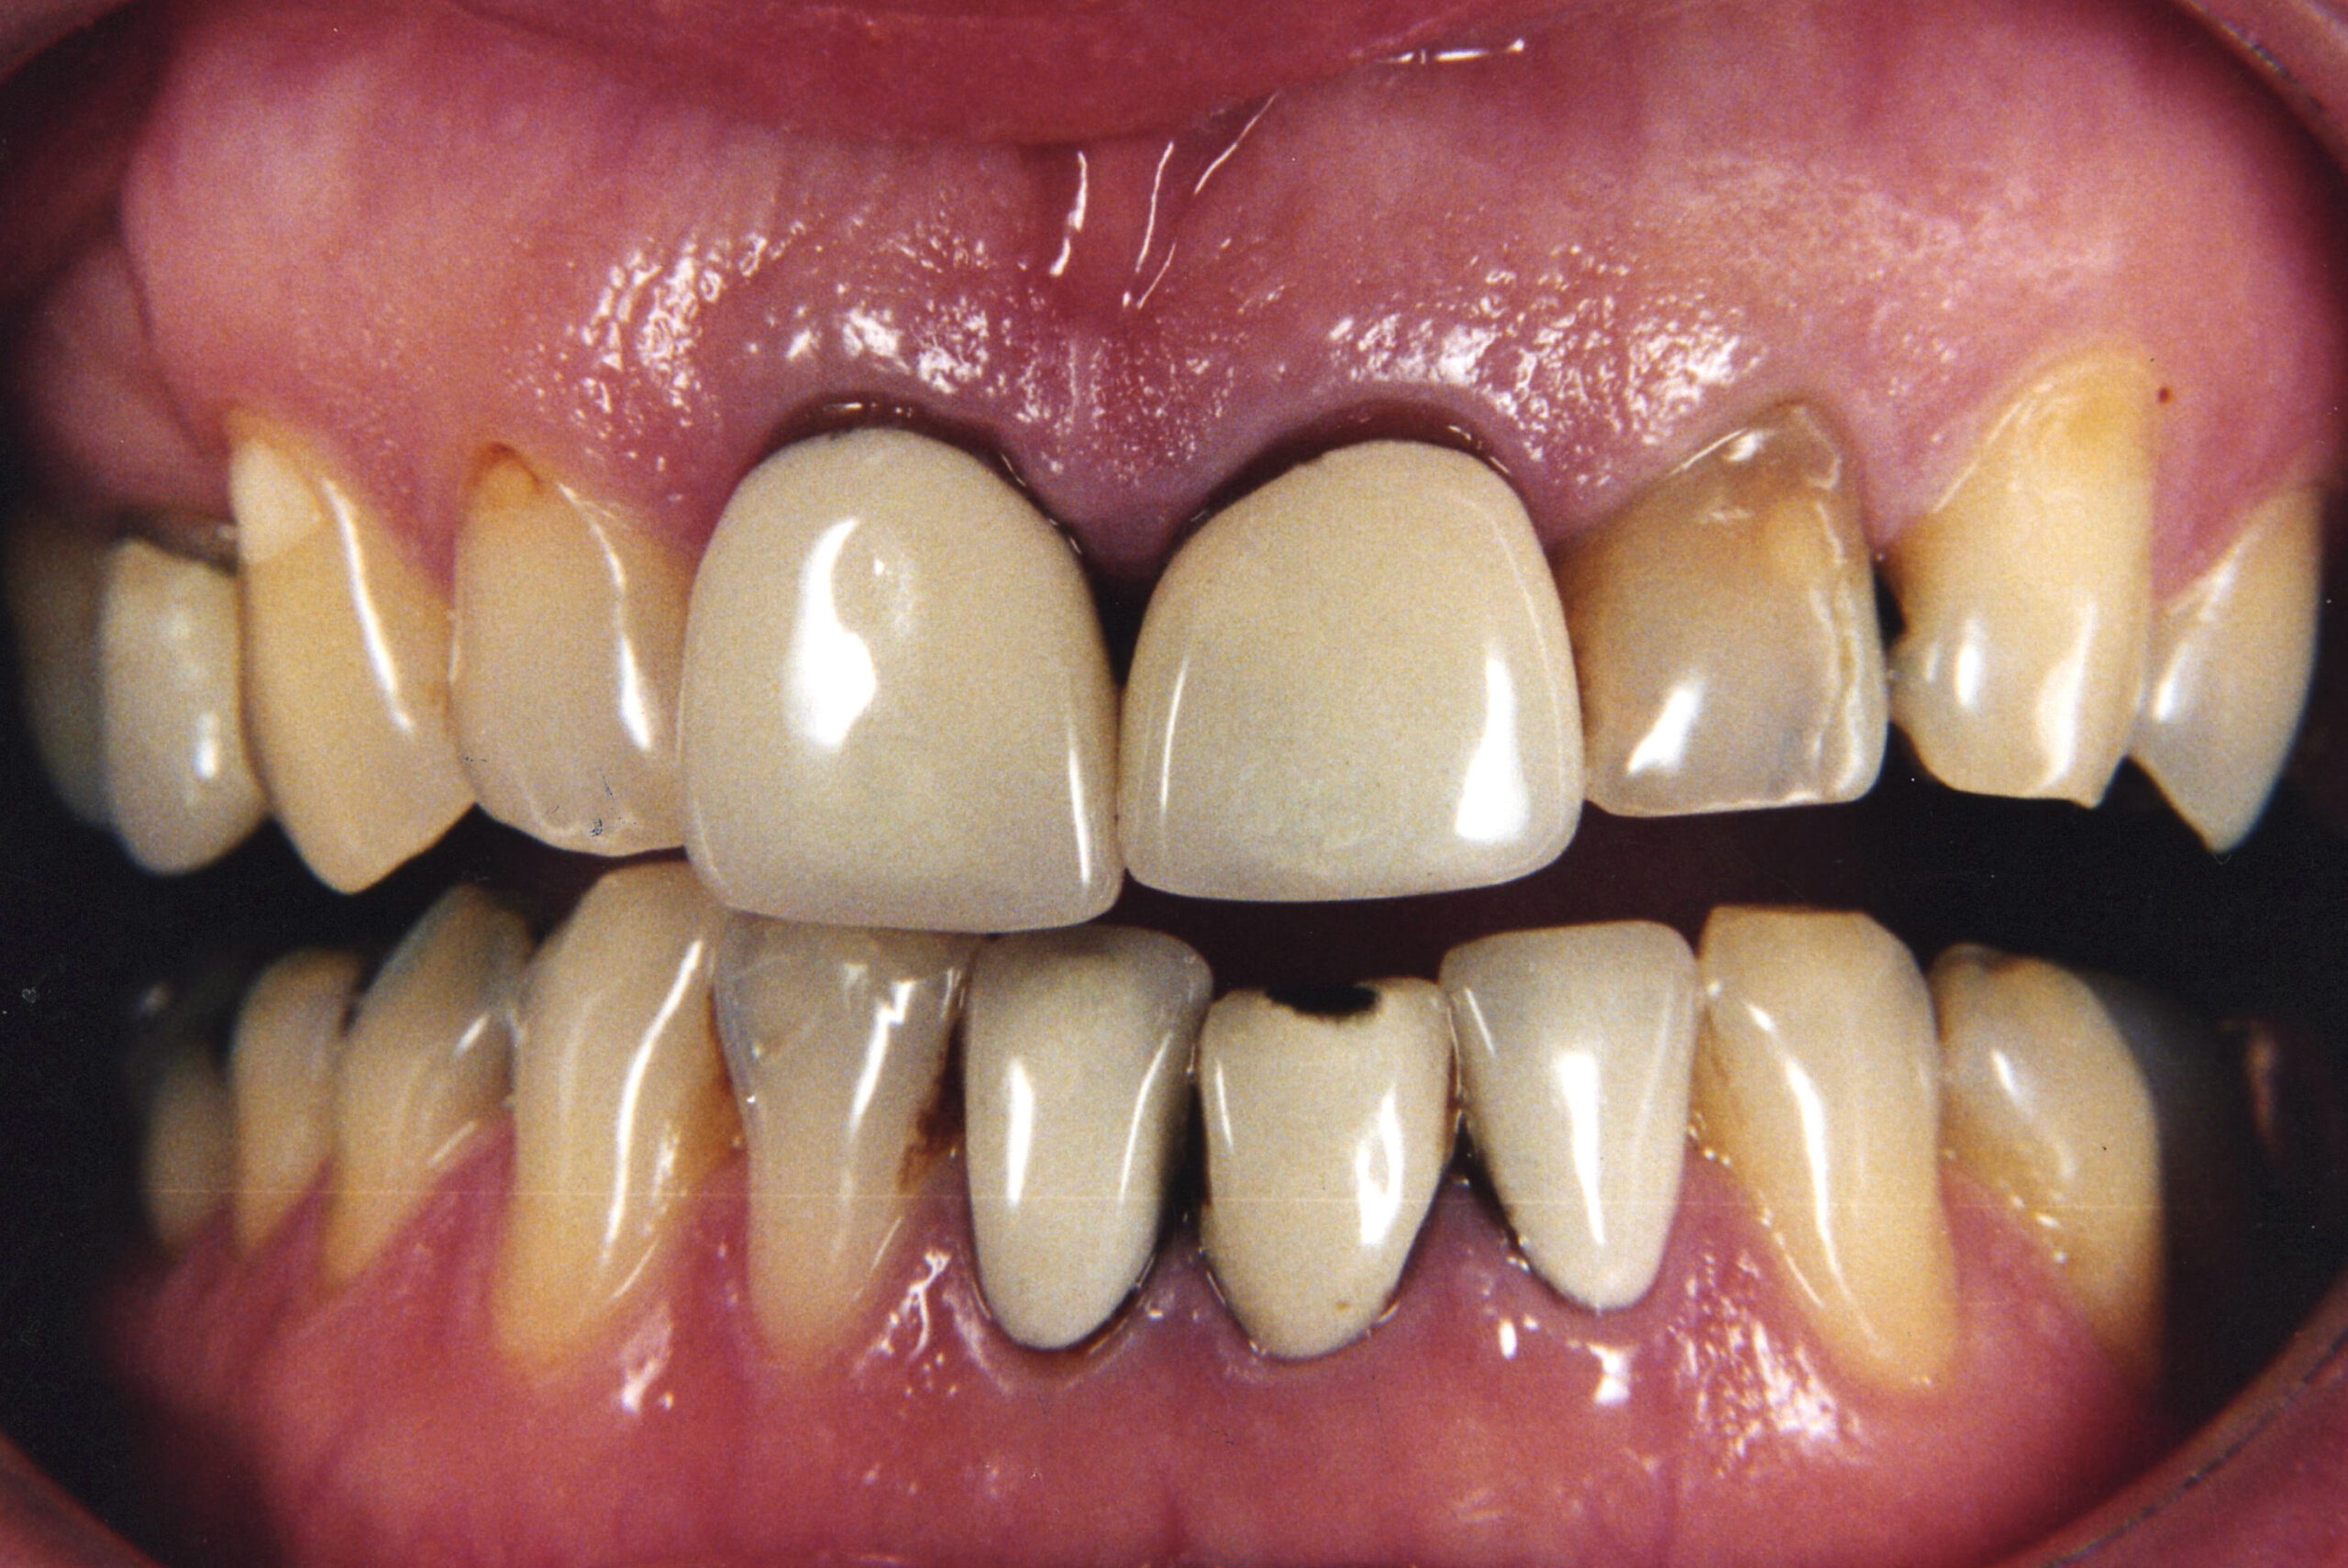 Crowns - Upper front teeth - Before